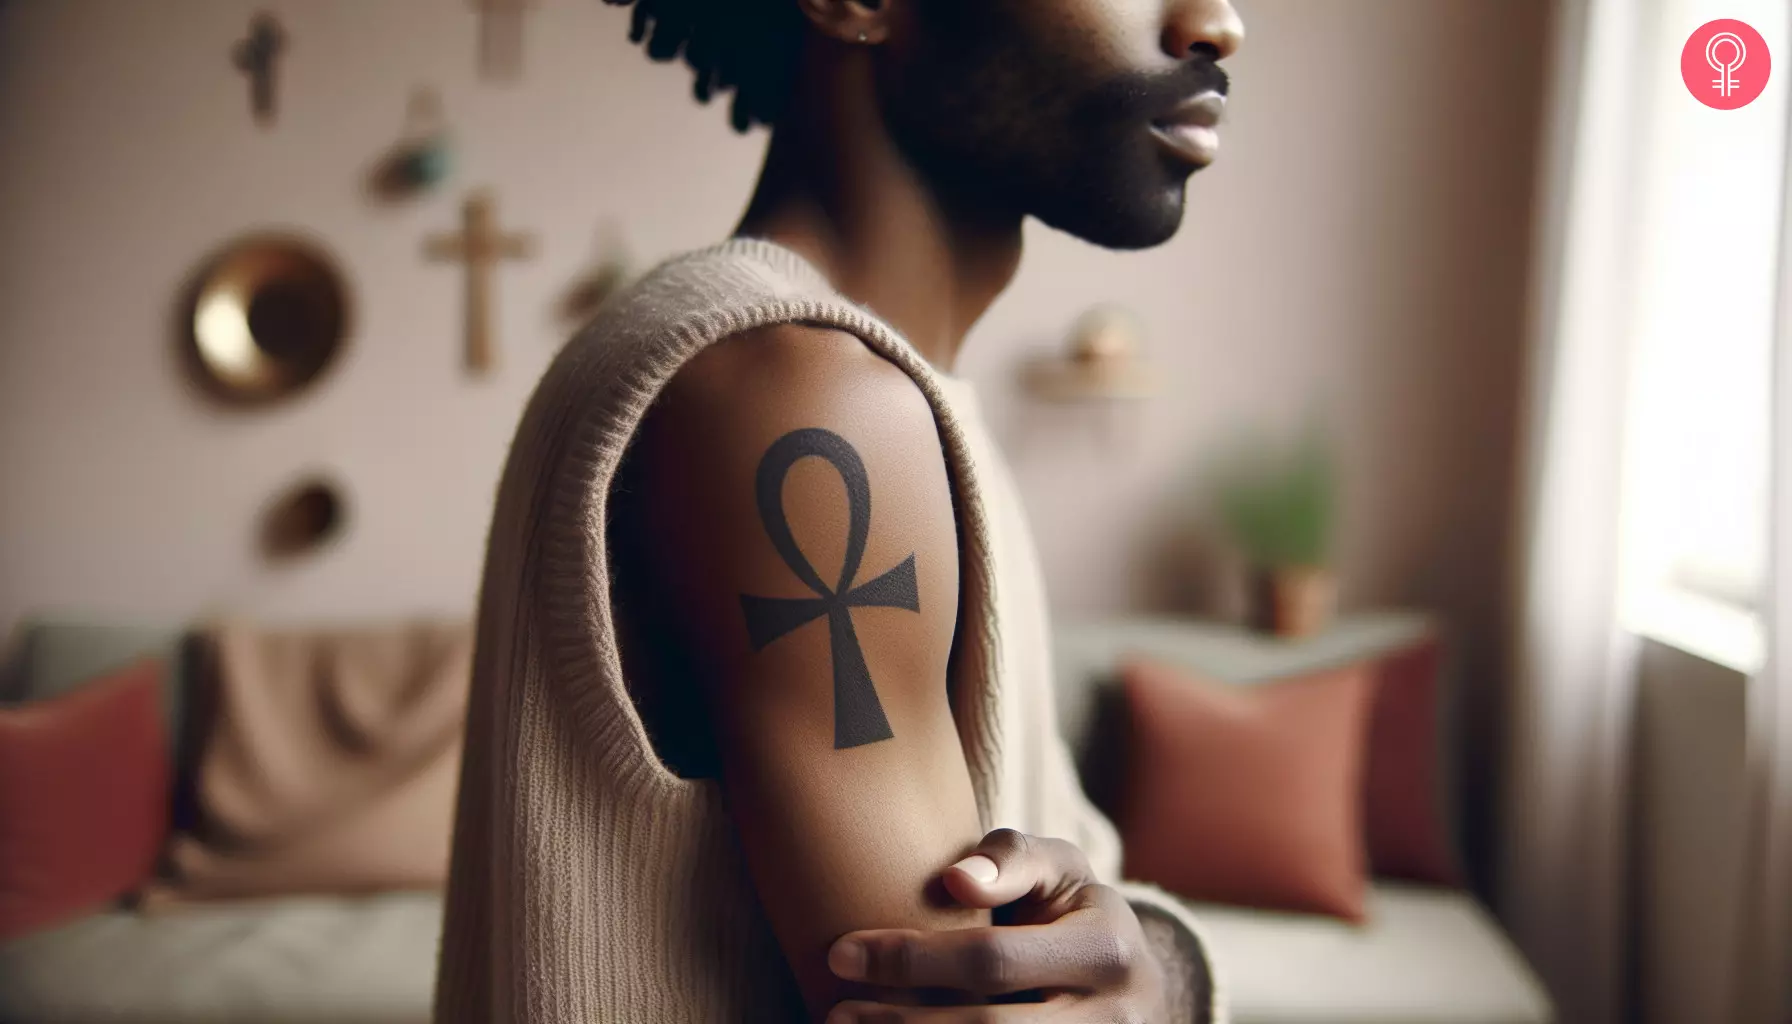 Ankh tattoo on the forearm of a black man